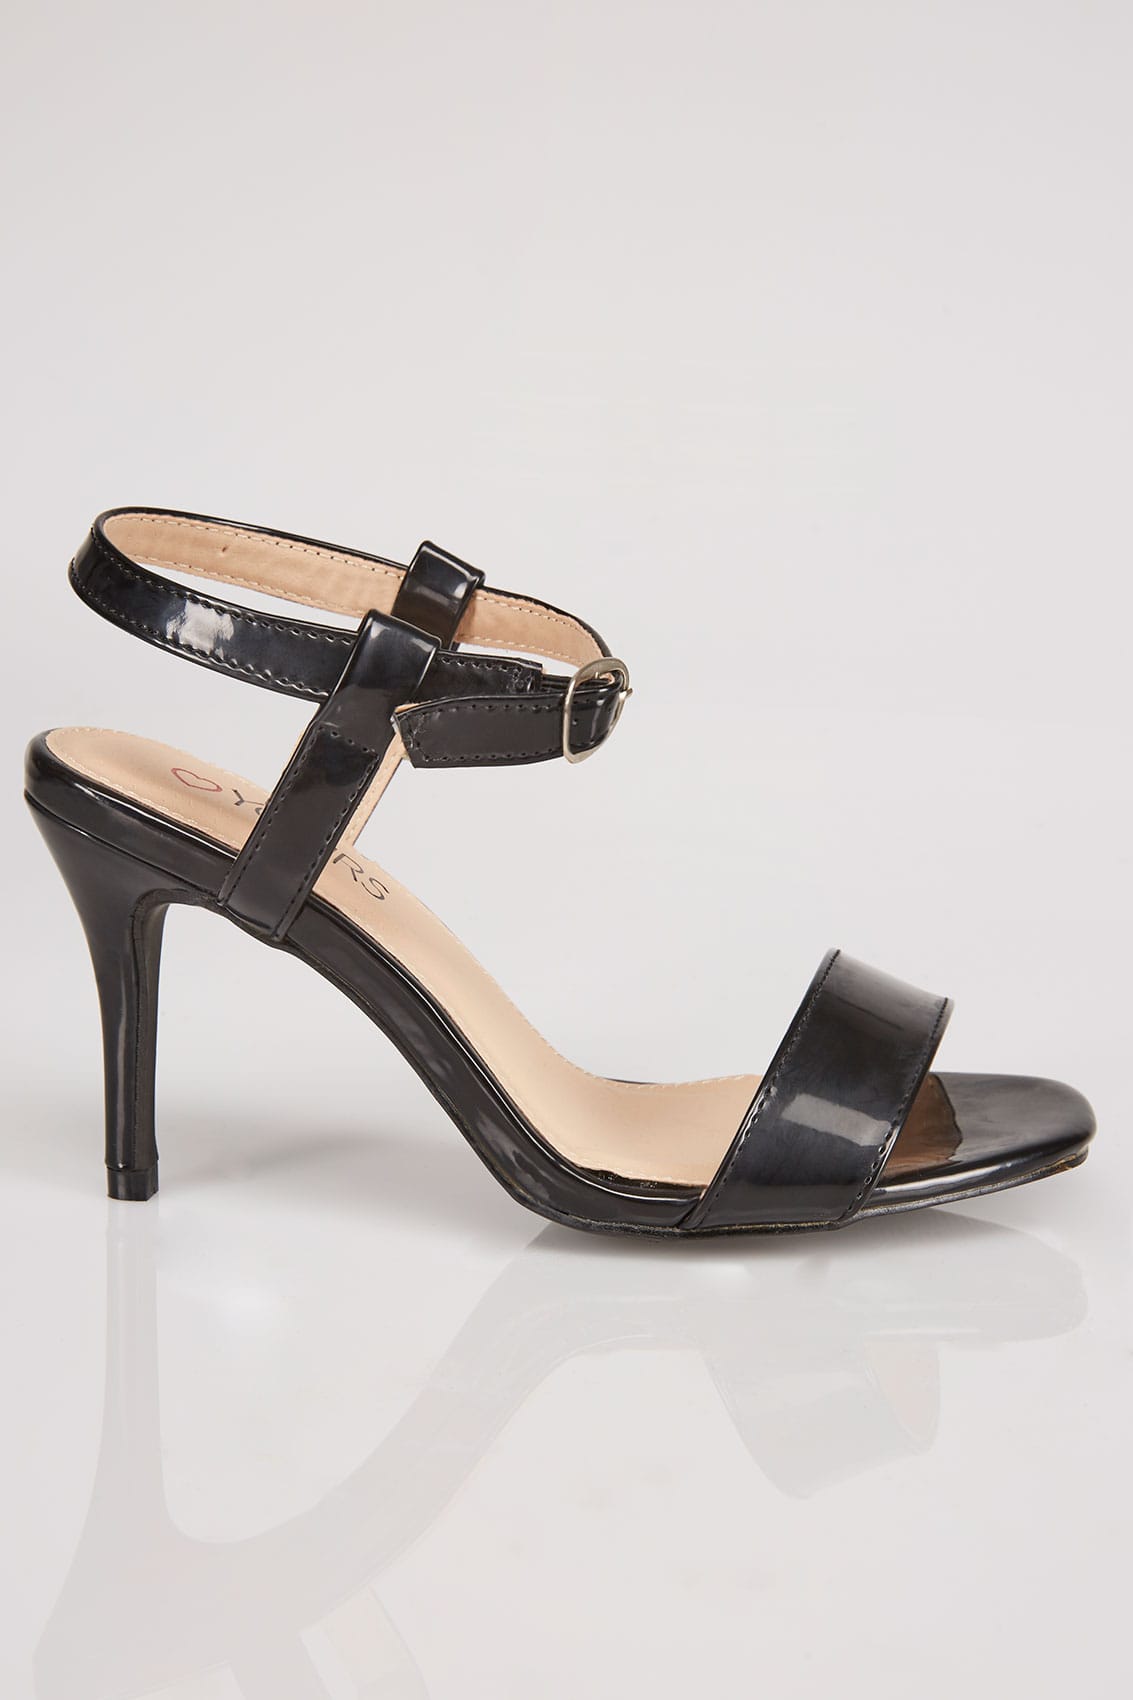 Black Patent Square Toe Heeled Sandals With Ankle Strap In ...